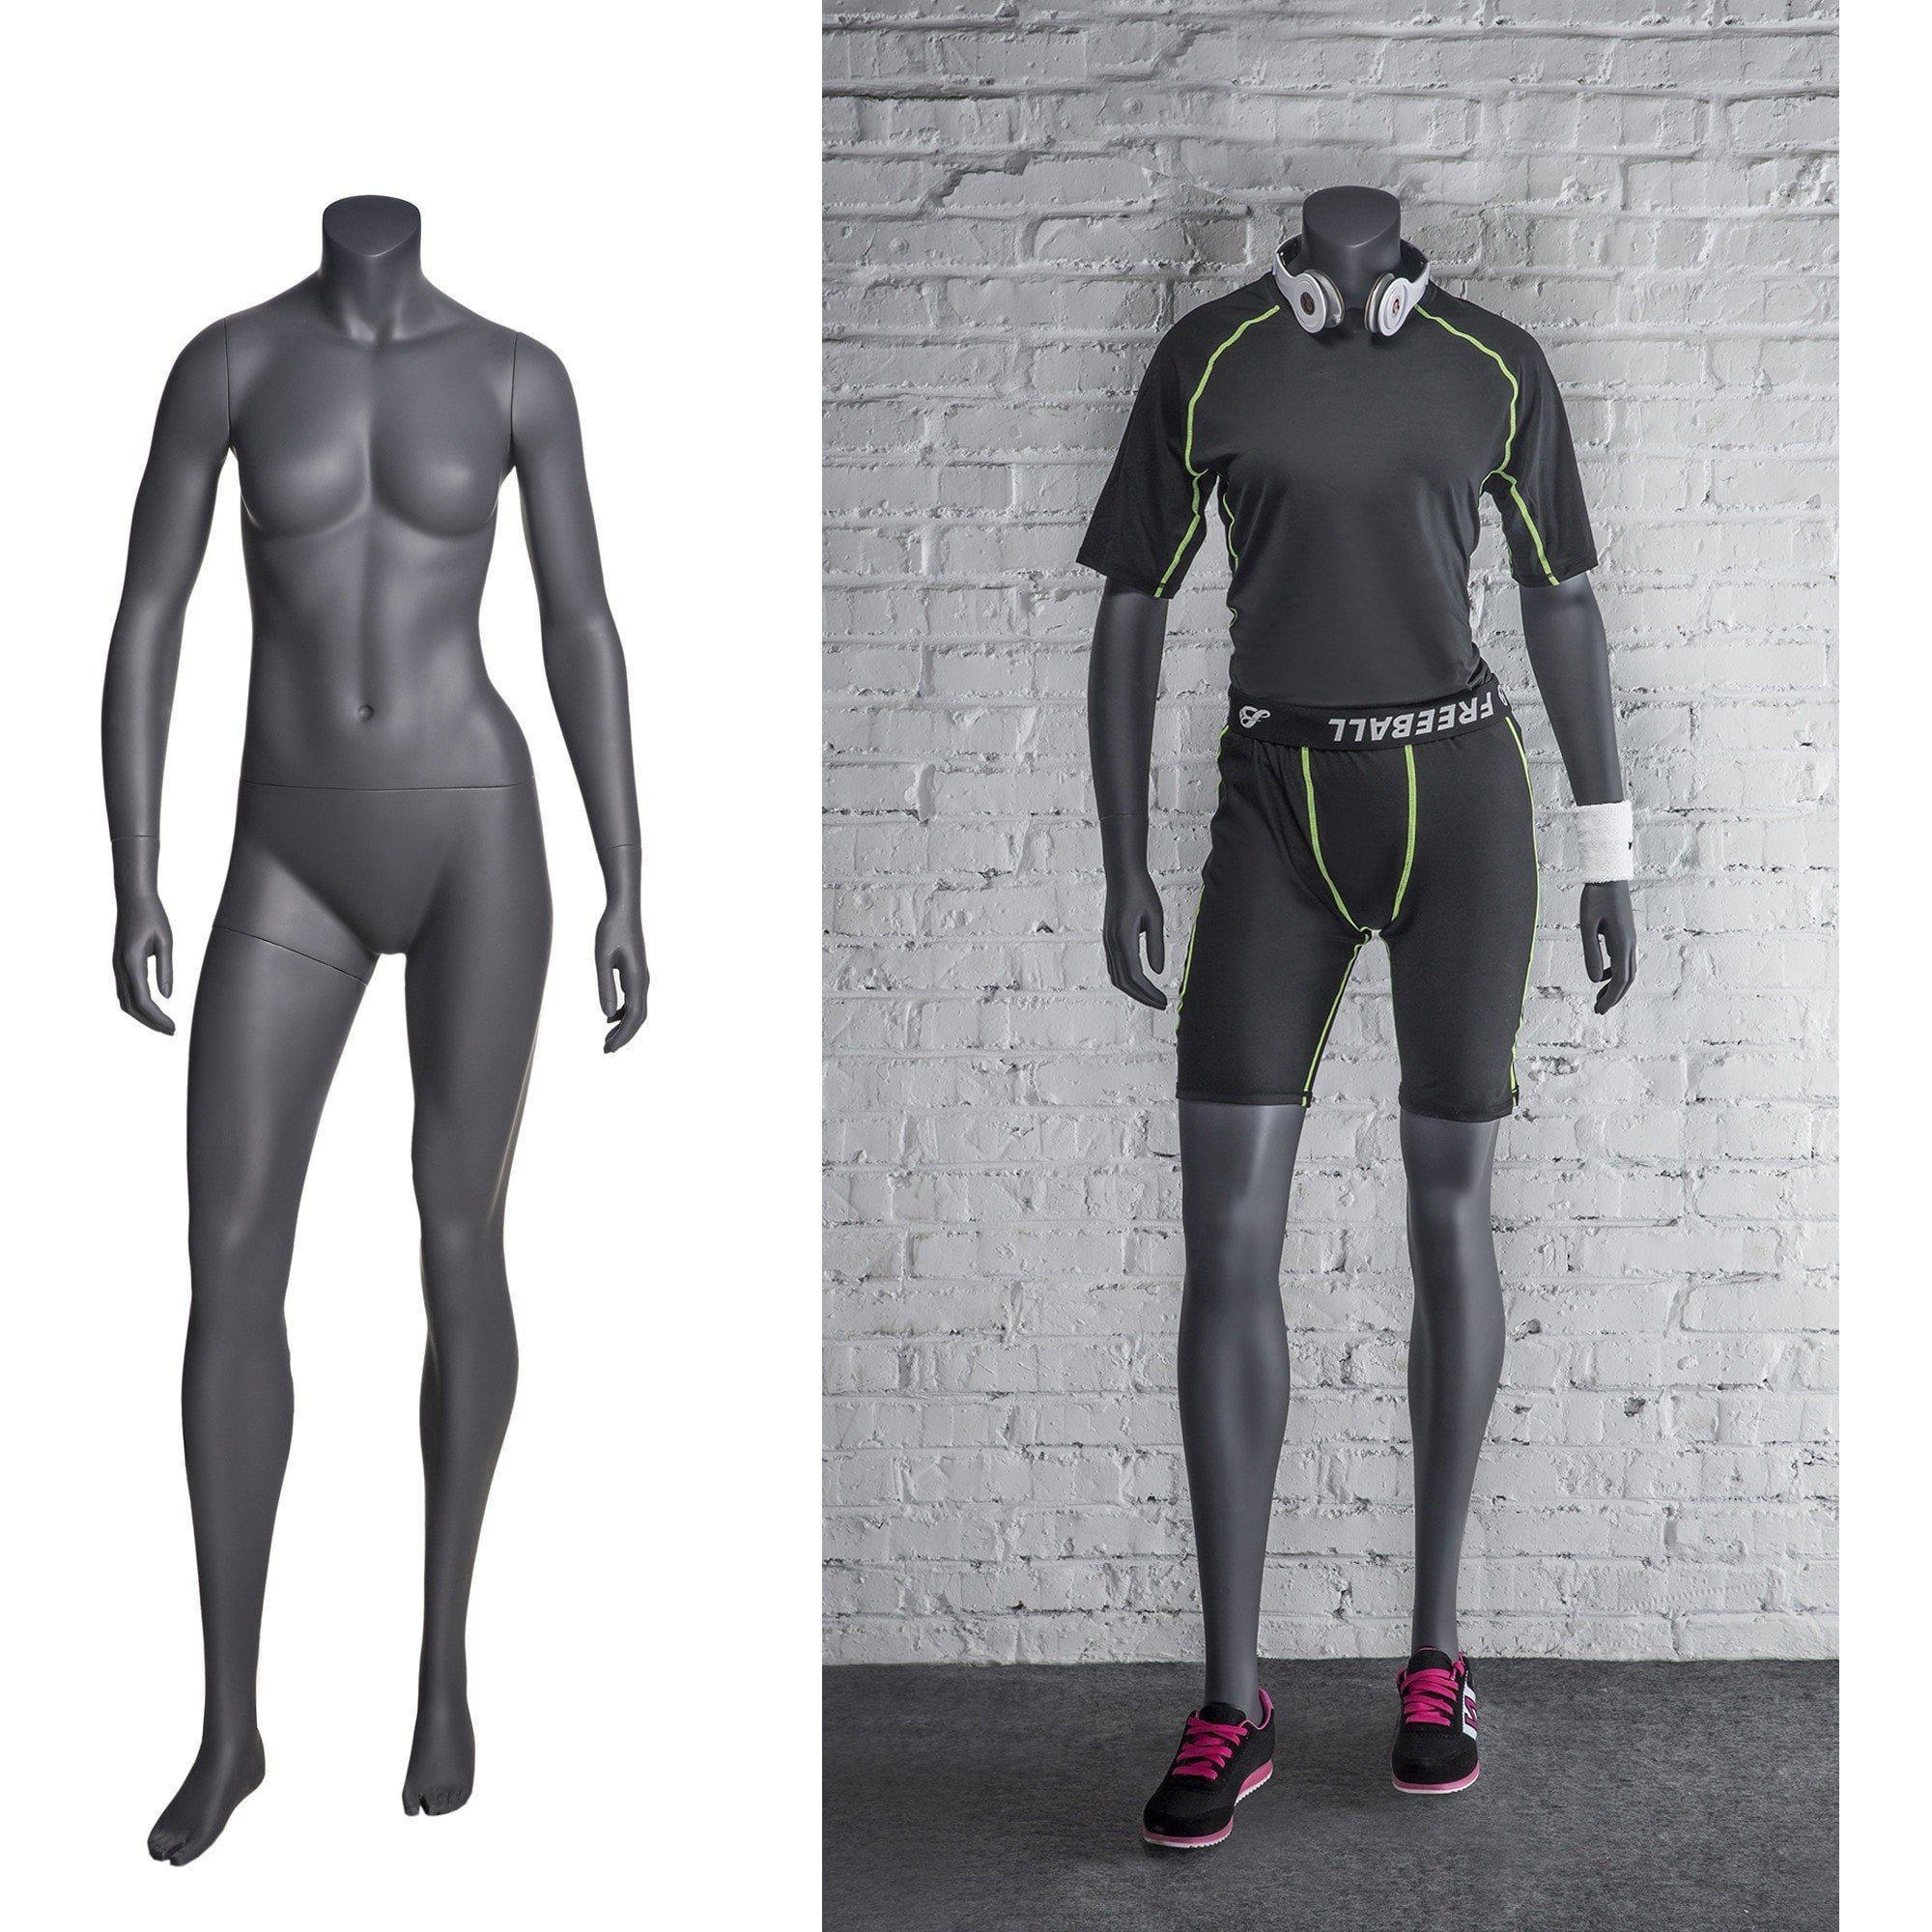 Male & Female Sports Mannequins For Sale I Mannequin Mall